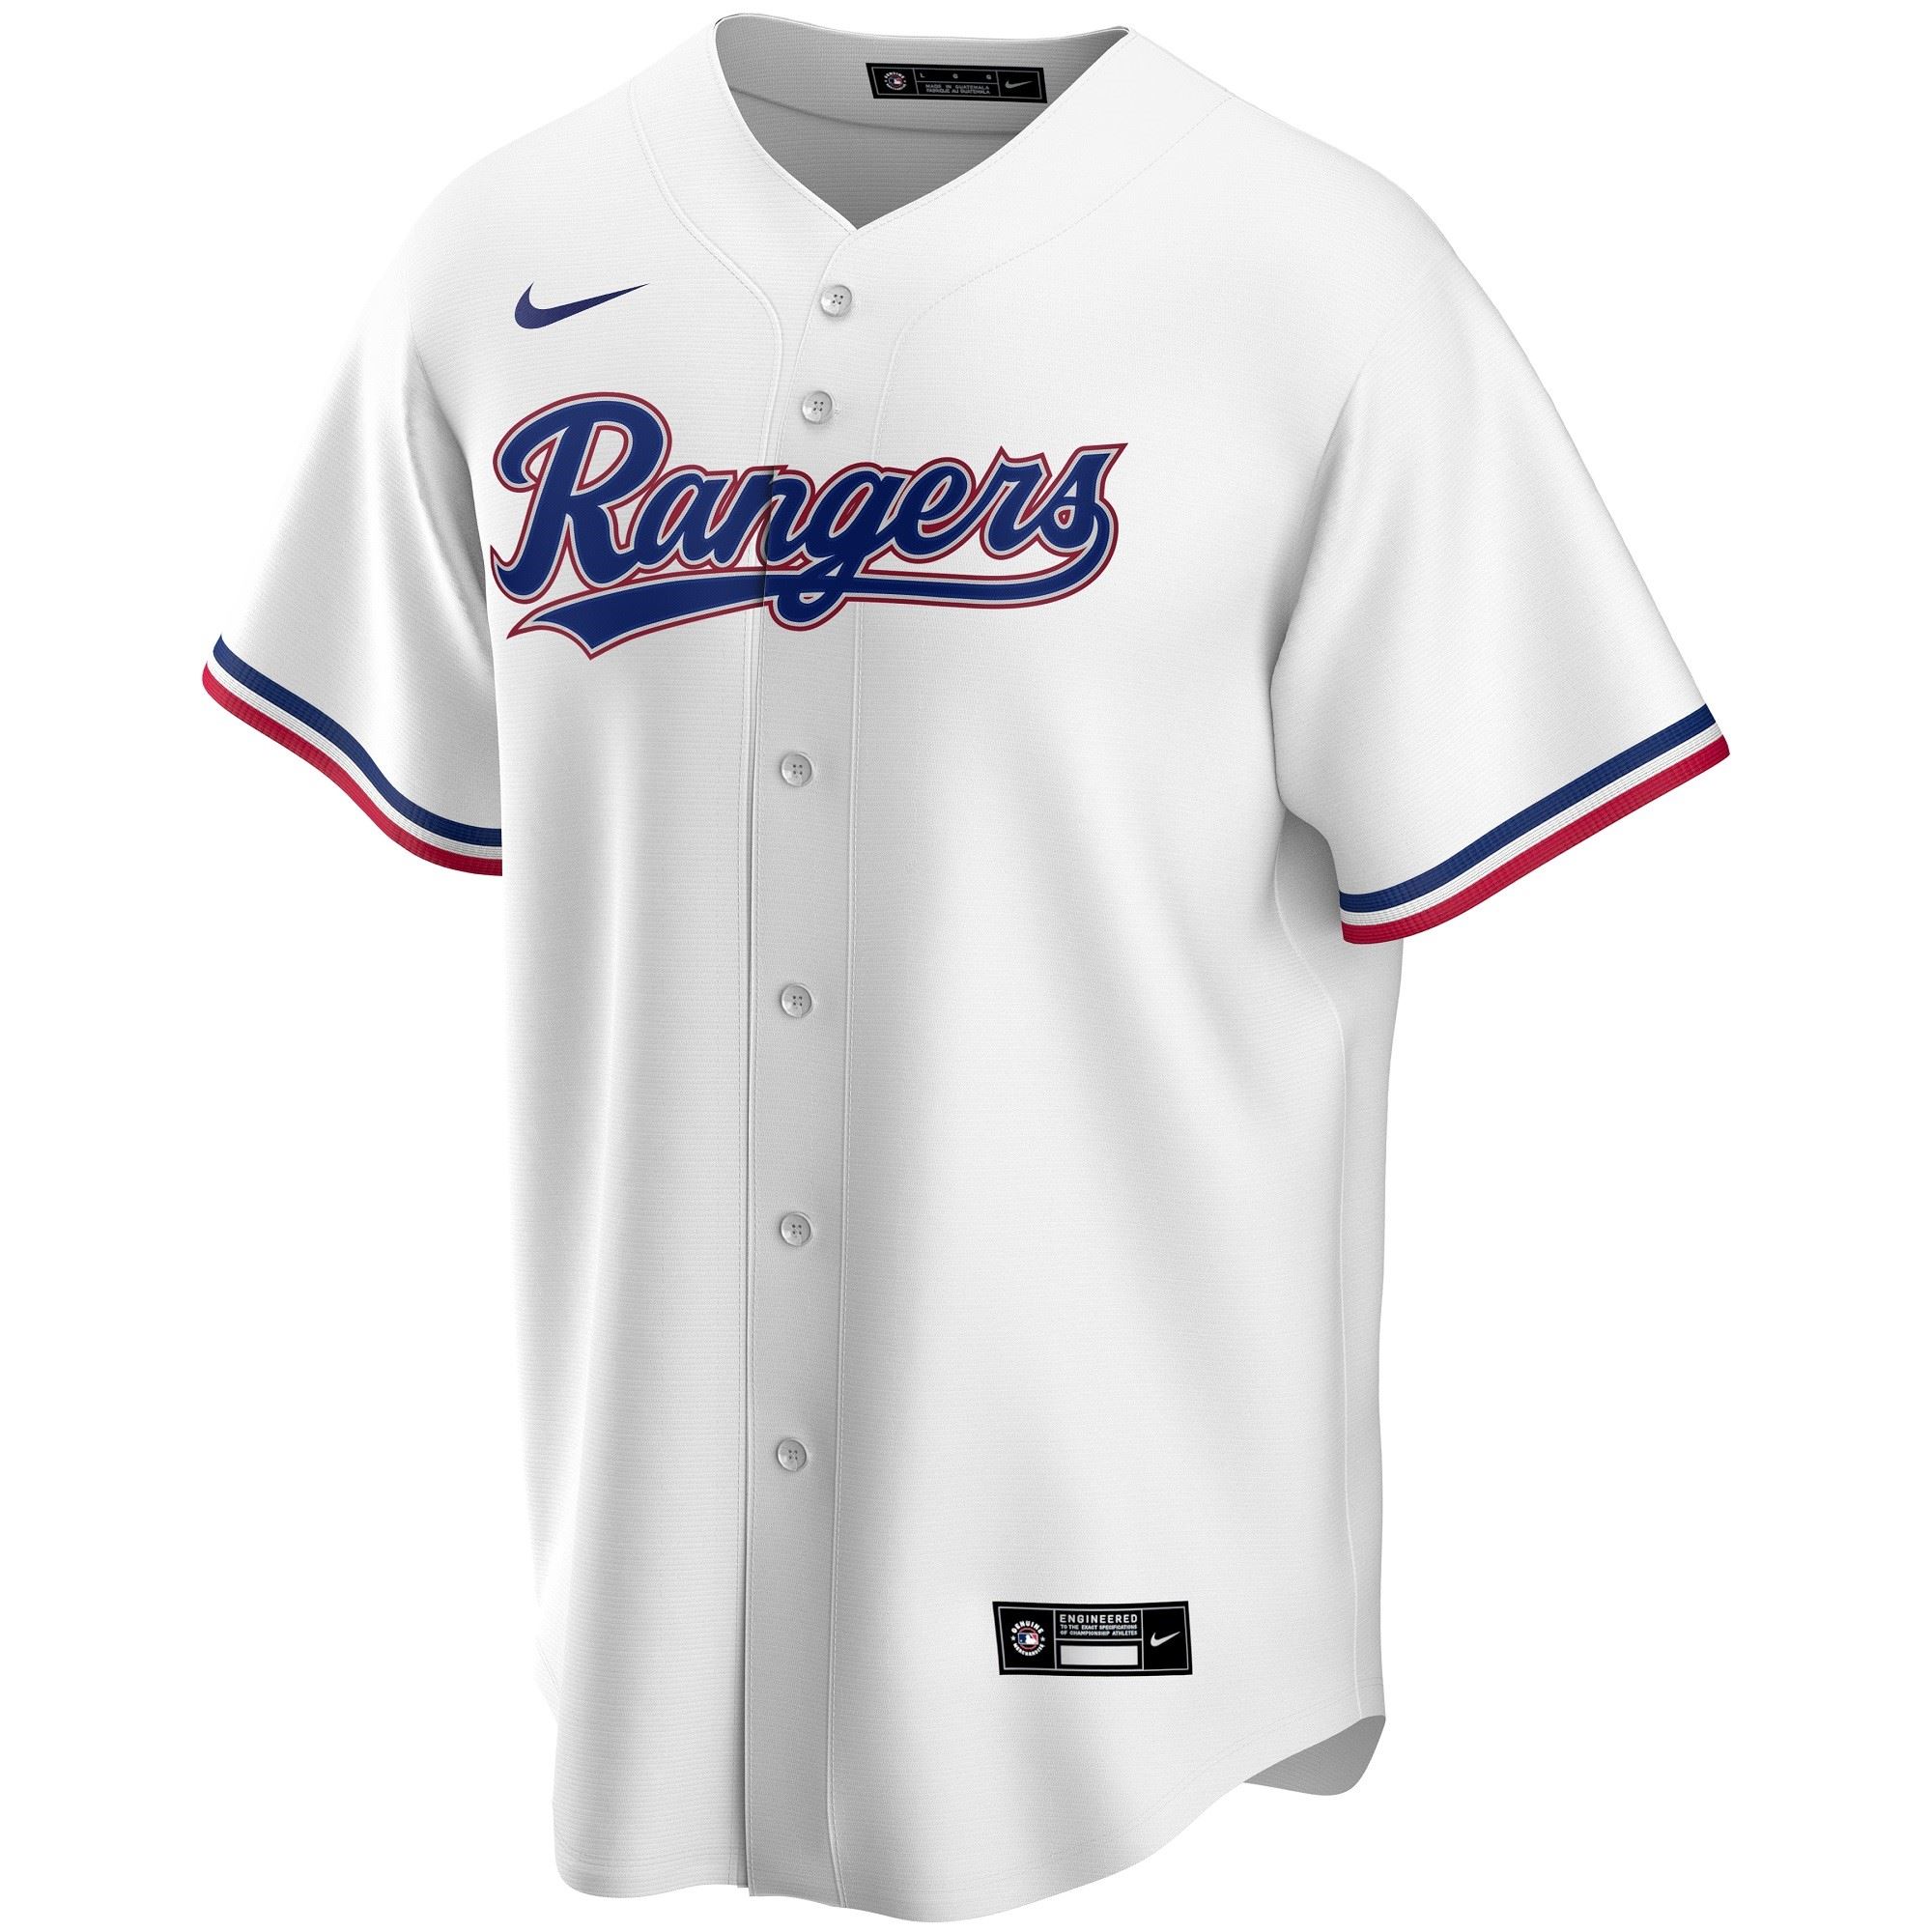 Texas Rangers Official MLB Replica Home Jersey White Nike